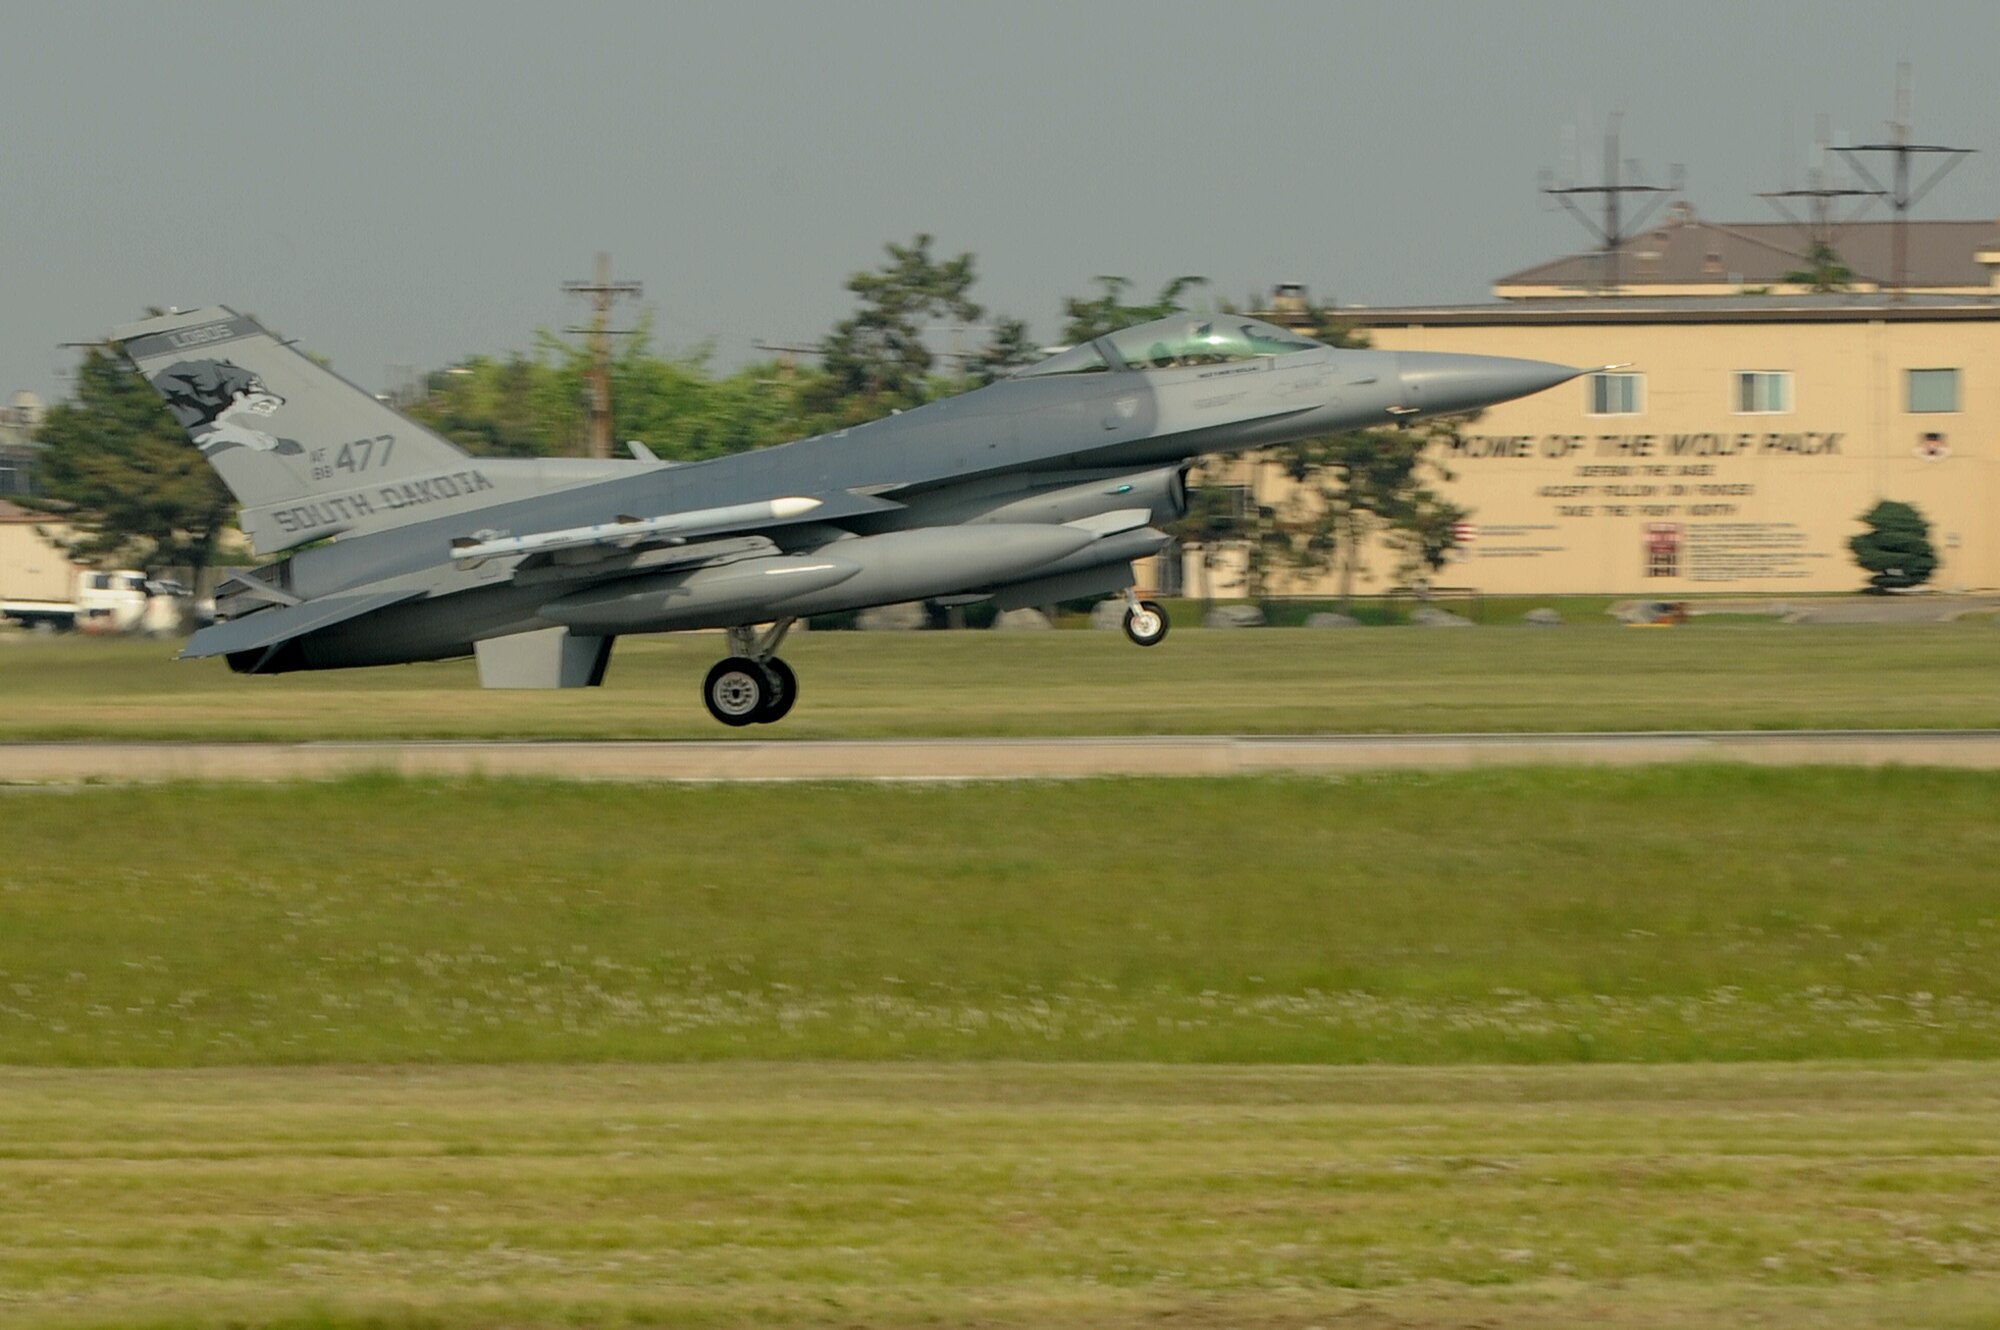 An F-16 Fighting Falcon from the 114th Fighter Wing, arrives at Kunsan Air Base, Republic of Korea, May, 14, 2015. More than 250 South Dakota National Guard from the 114th Fighter Wing, at Joe Foss Field, Sioux Falls, South Dakota, are deployed here as the 175th Fighter Squadron, part of the rotational Threat Security Package that strengthens U.S. forces across the Asia-Pacific region. (U.S. Air Force photo by Senior Airman Divine Cox/Released)